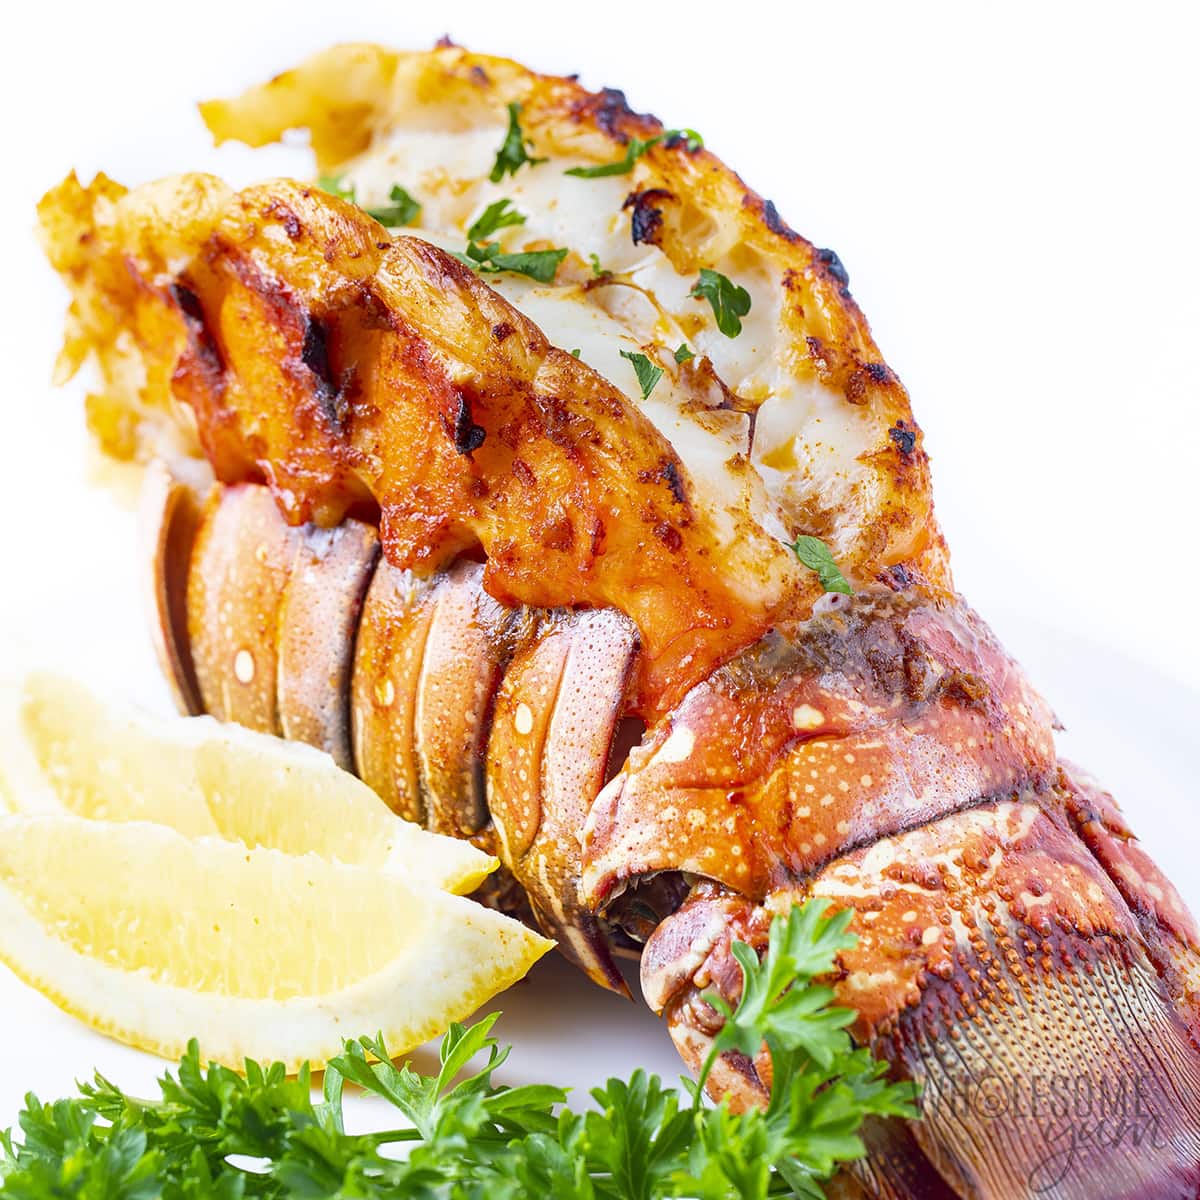 Lobster tail recipe finished with parsley and lemon.